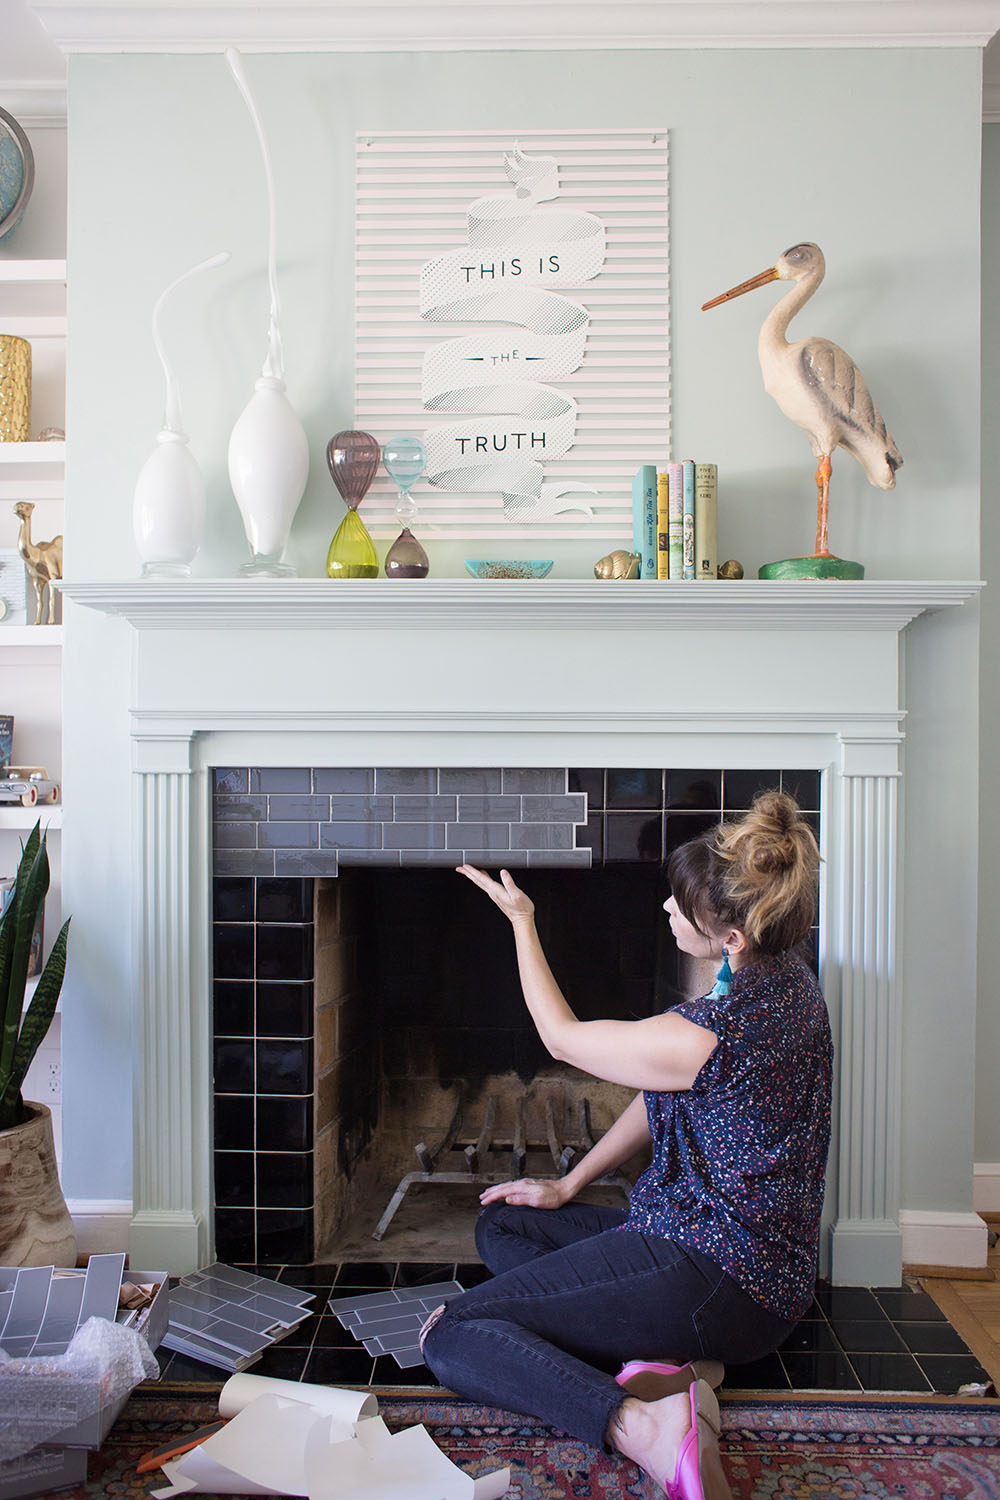 Diy Tile Fireplace Makeover, How To Change Tile Around Fireplace